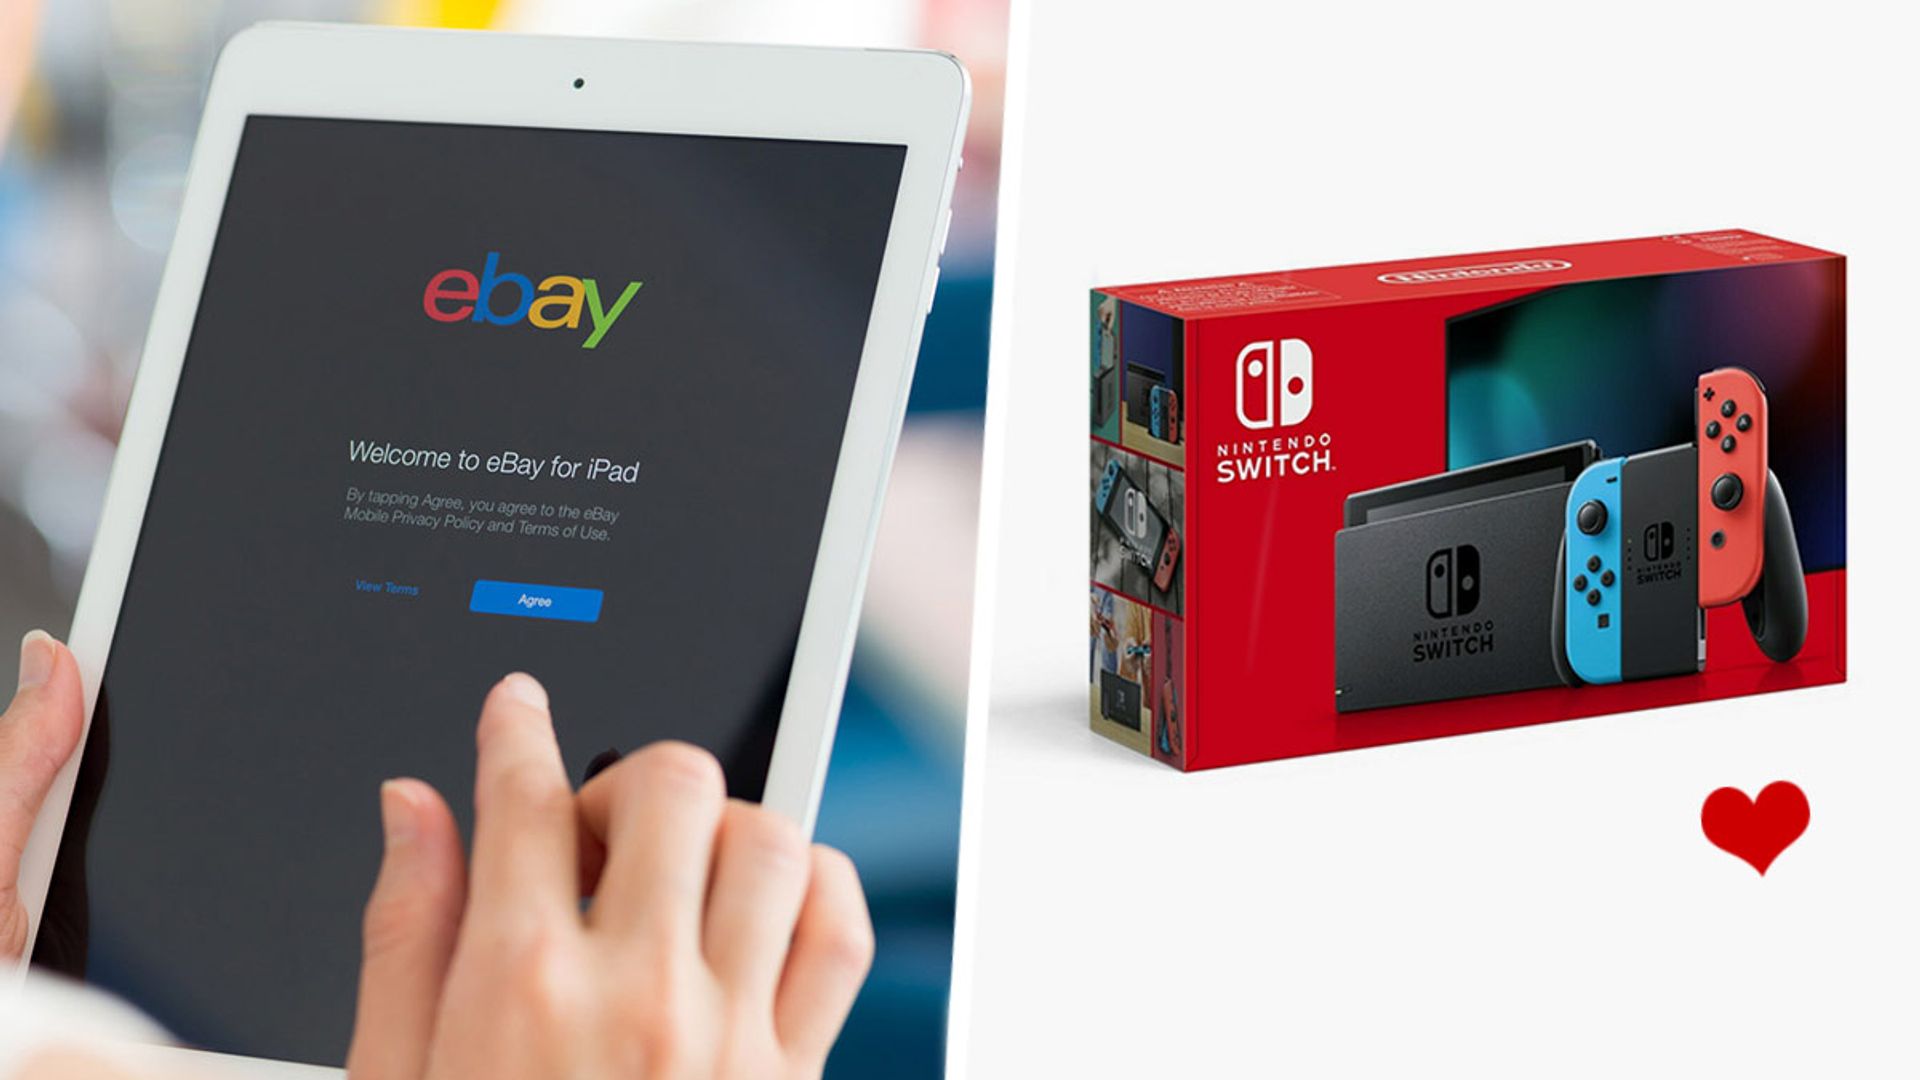 Ebay's Cyber Monday deals include £100 off a Nintendo Switch and a cut-price Dyson hairdryer